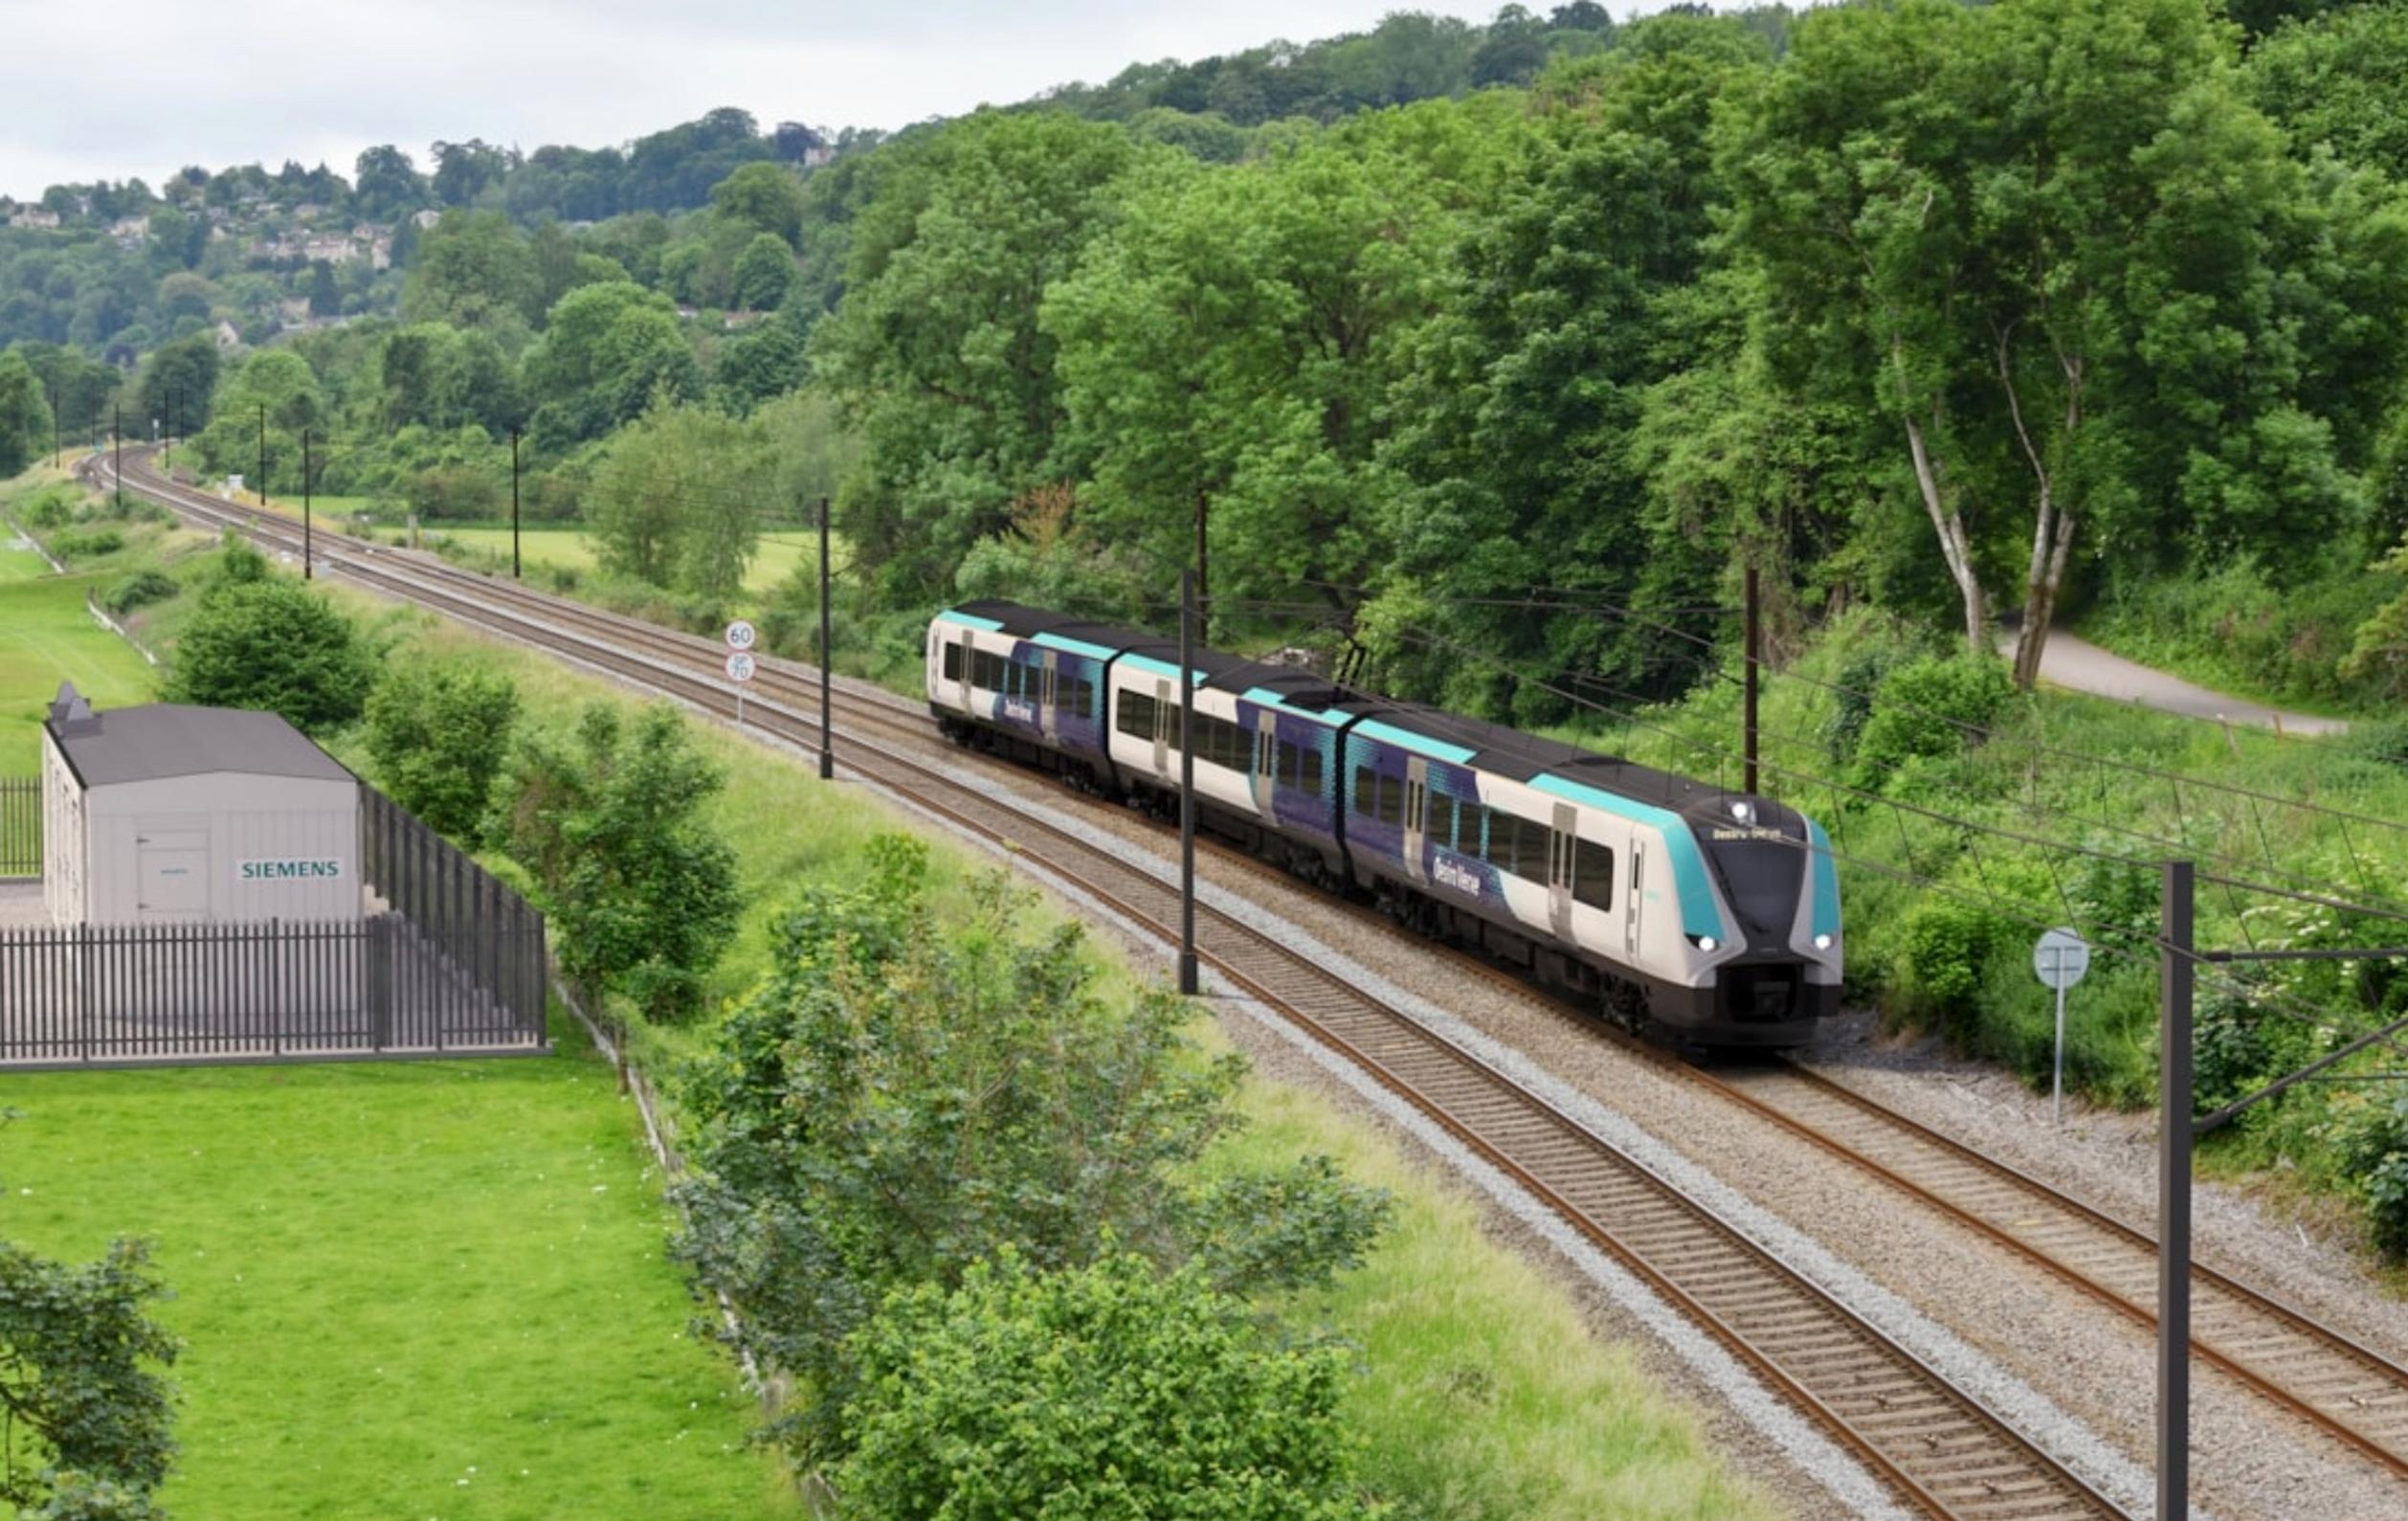 Siemens Mobility says that its new battery bi-mode trains would mean that only 20 – 30% of a line would need to be electrified